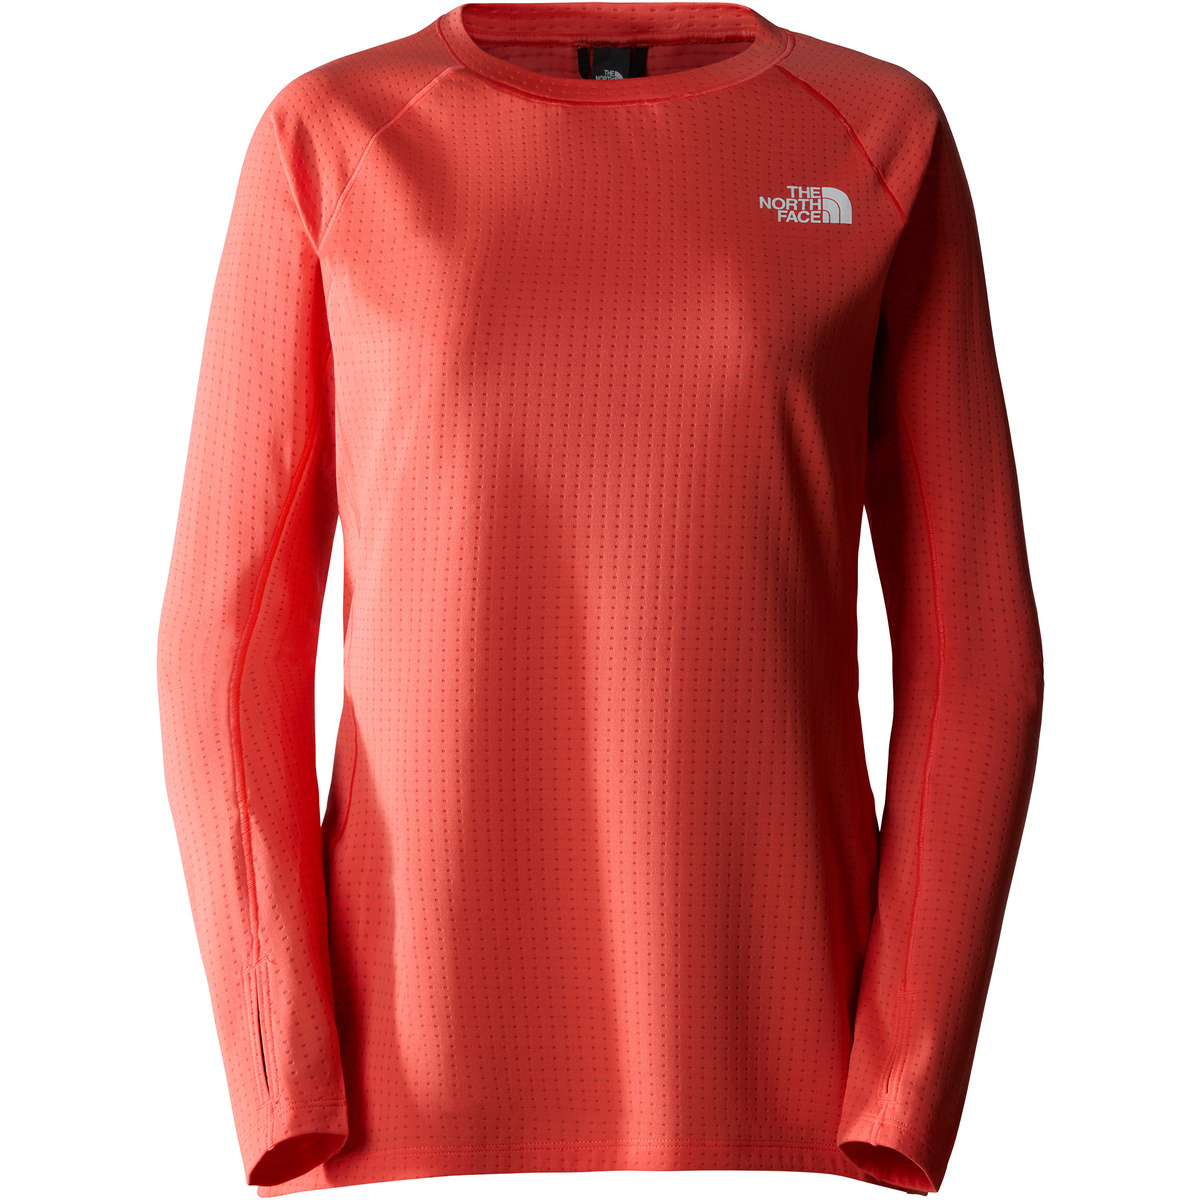 The North Face Damen Summit Pro 120 Crew Longsleeve von The North Face